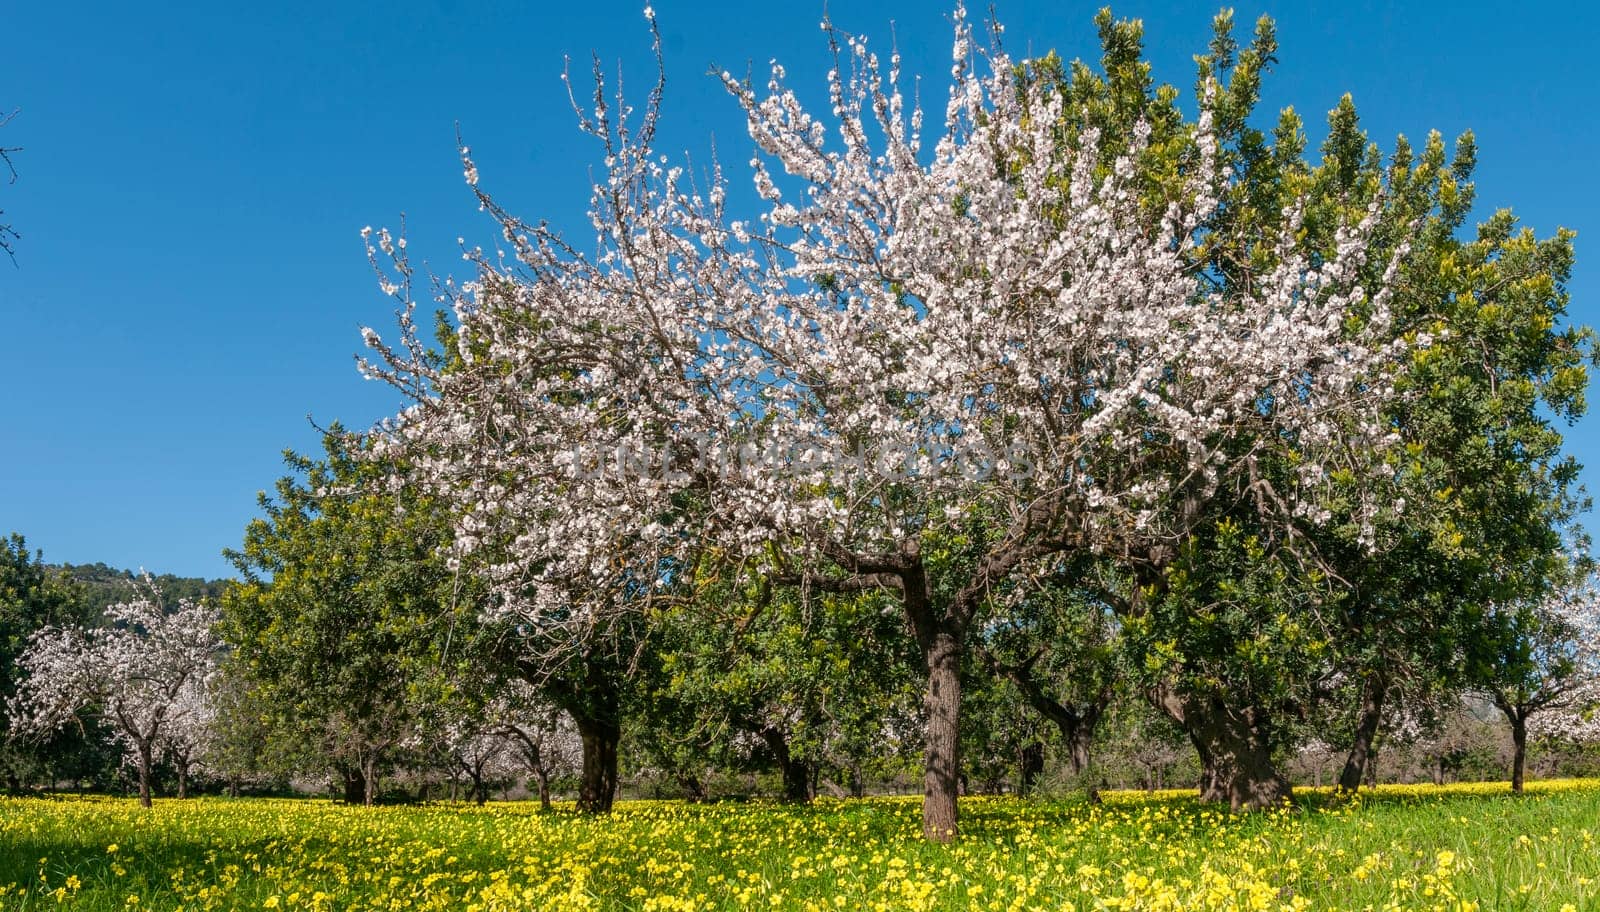 Springtime Splendor in a Blossoming Orchard with Golden Wildflowers by Juanjo39